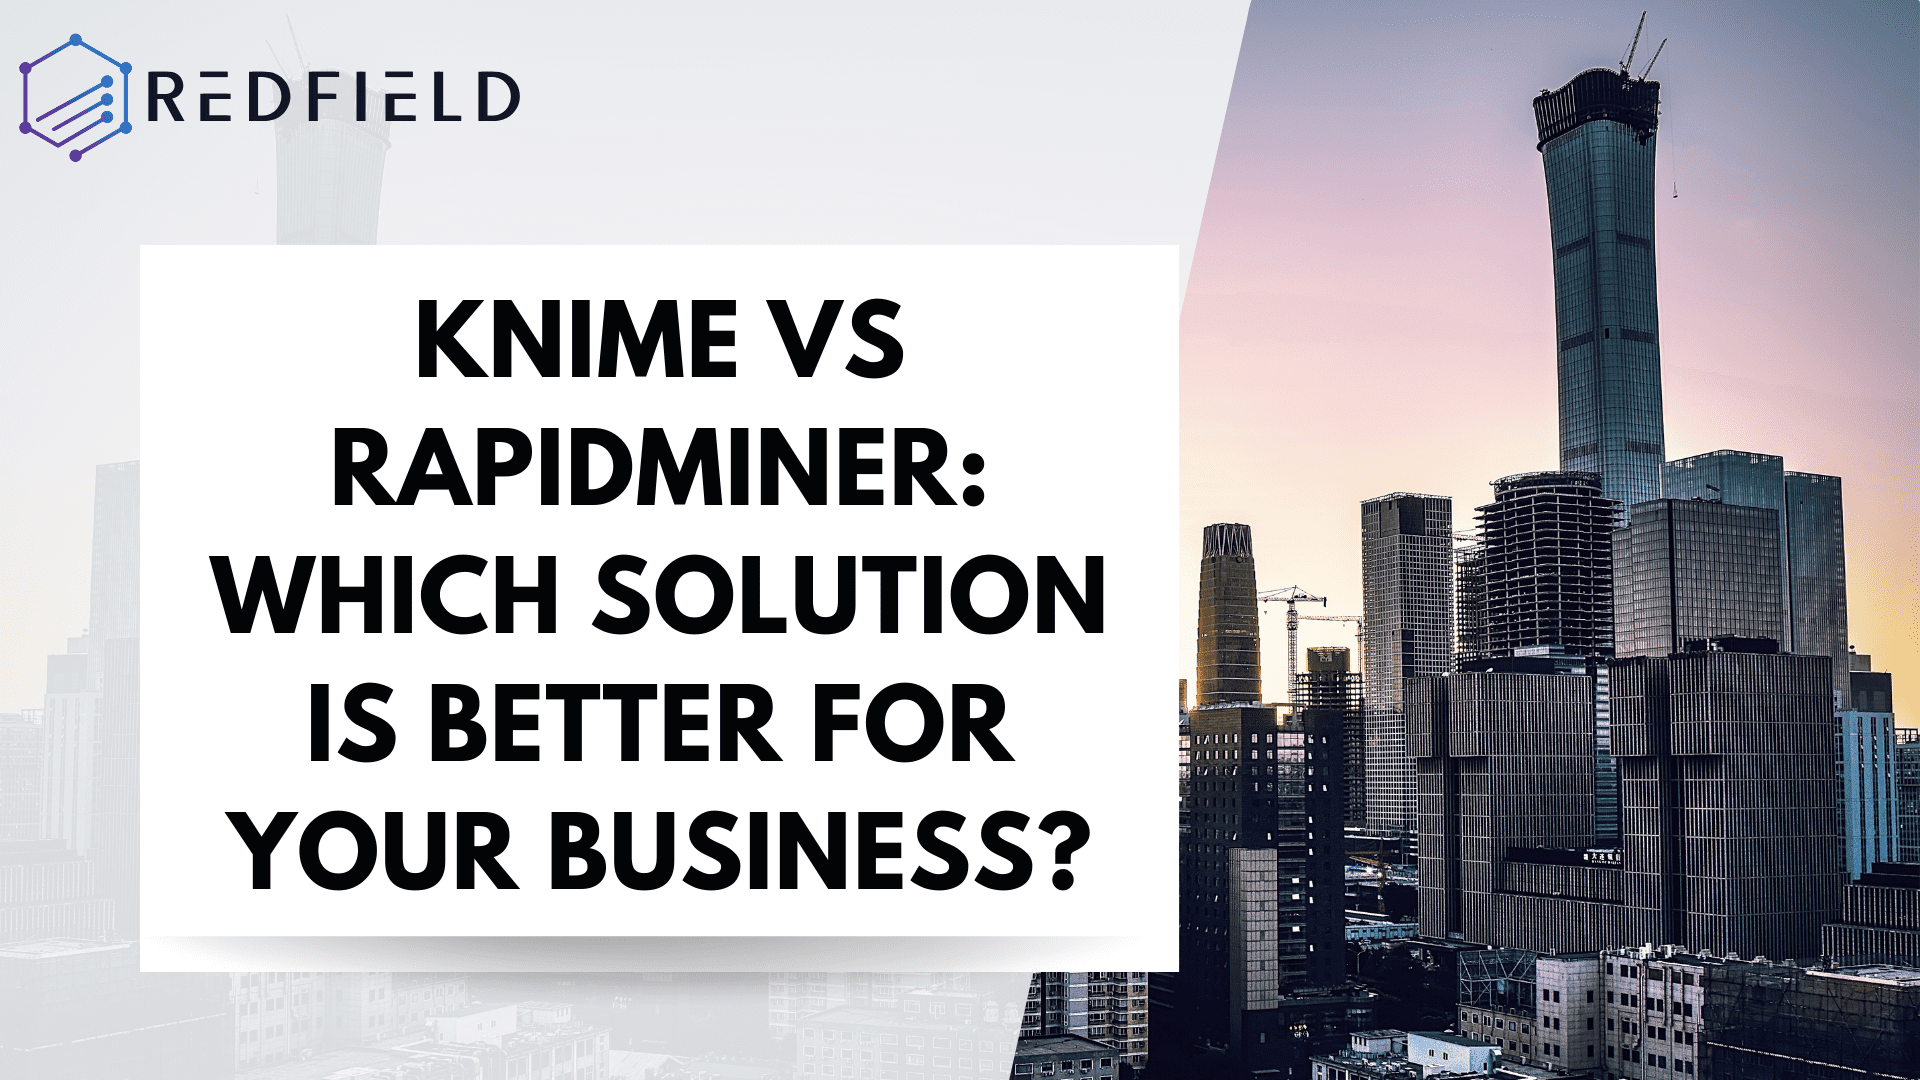 KNIME vs RapidMiner: Which Solution Is Better for Your Business?